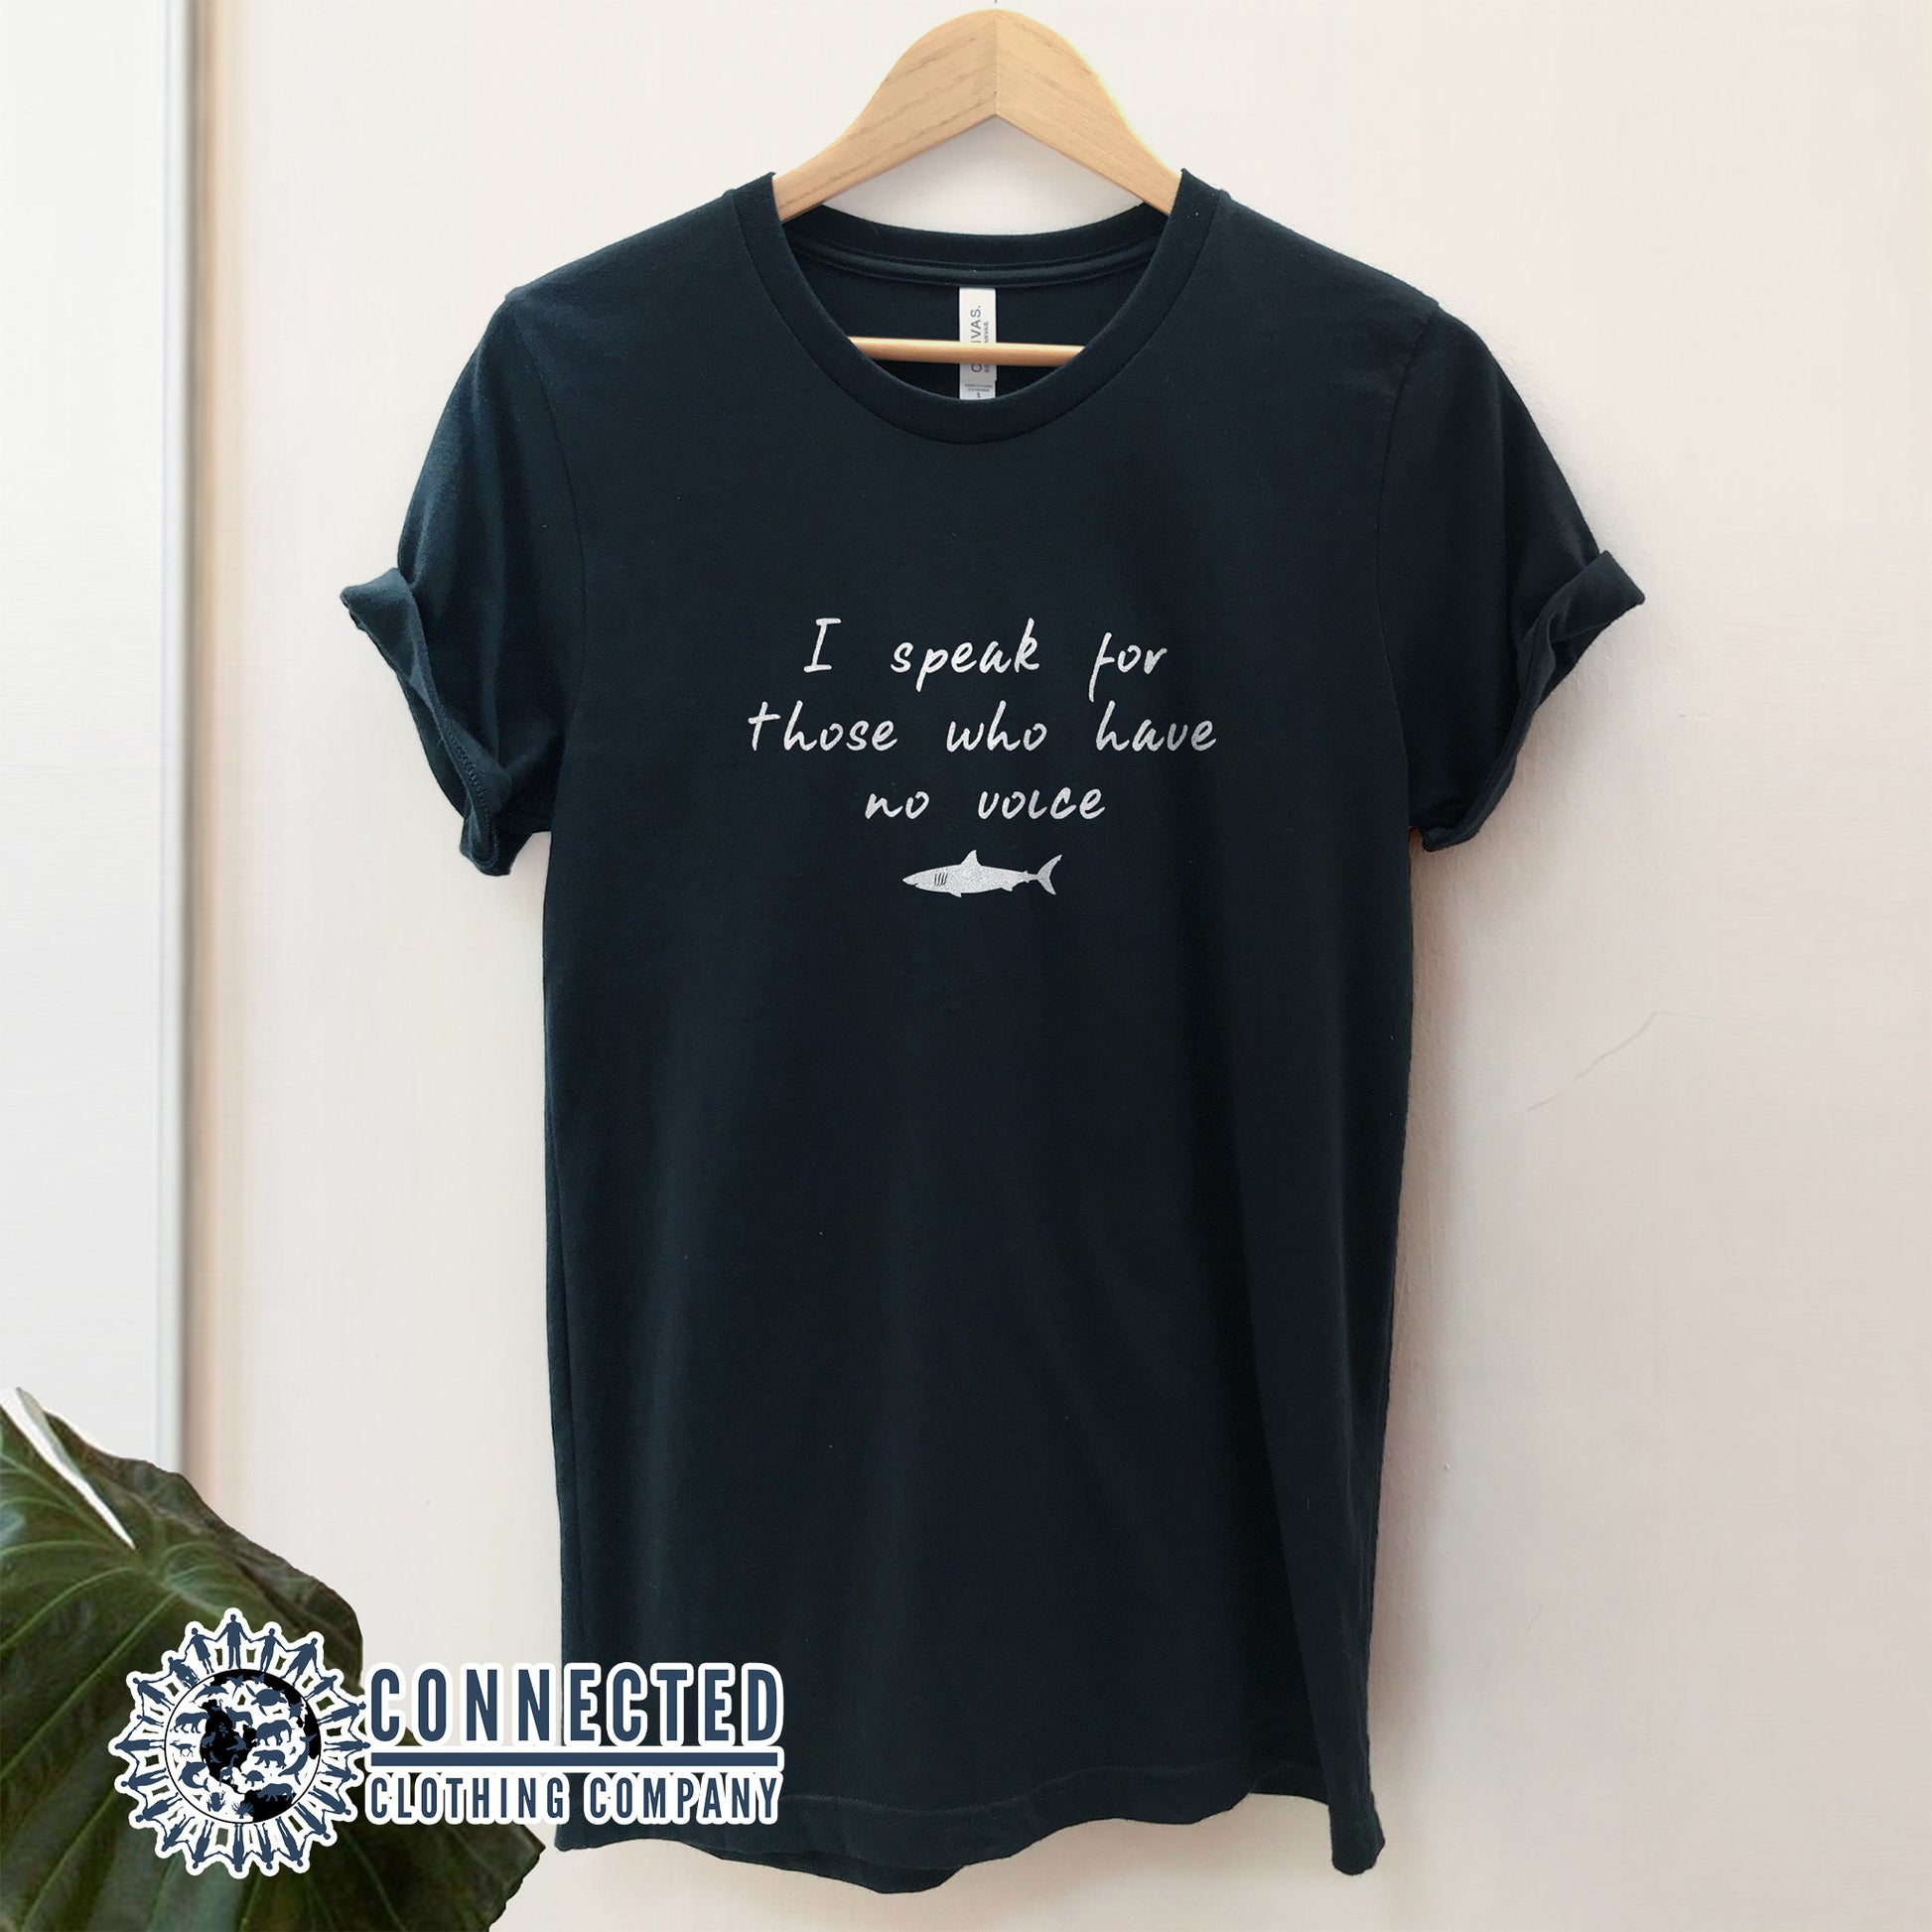 Black Be The Voice Shark Unisex Short-Sleeve T-Shirt reads "I speak for those who have no voice." - sweetsherriloudesigns - Ethically and Sustainably Made - 10% donated to Oceana shark conservation